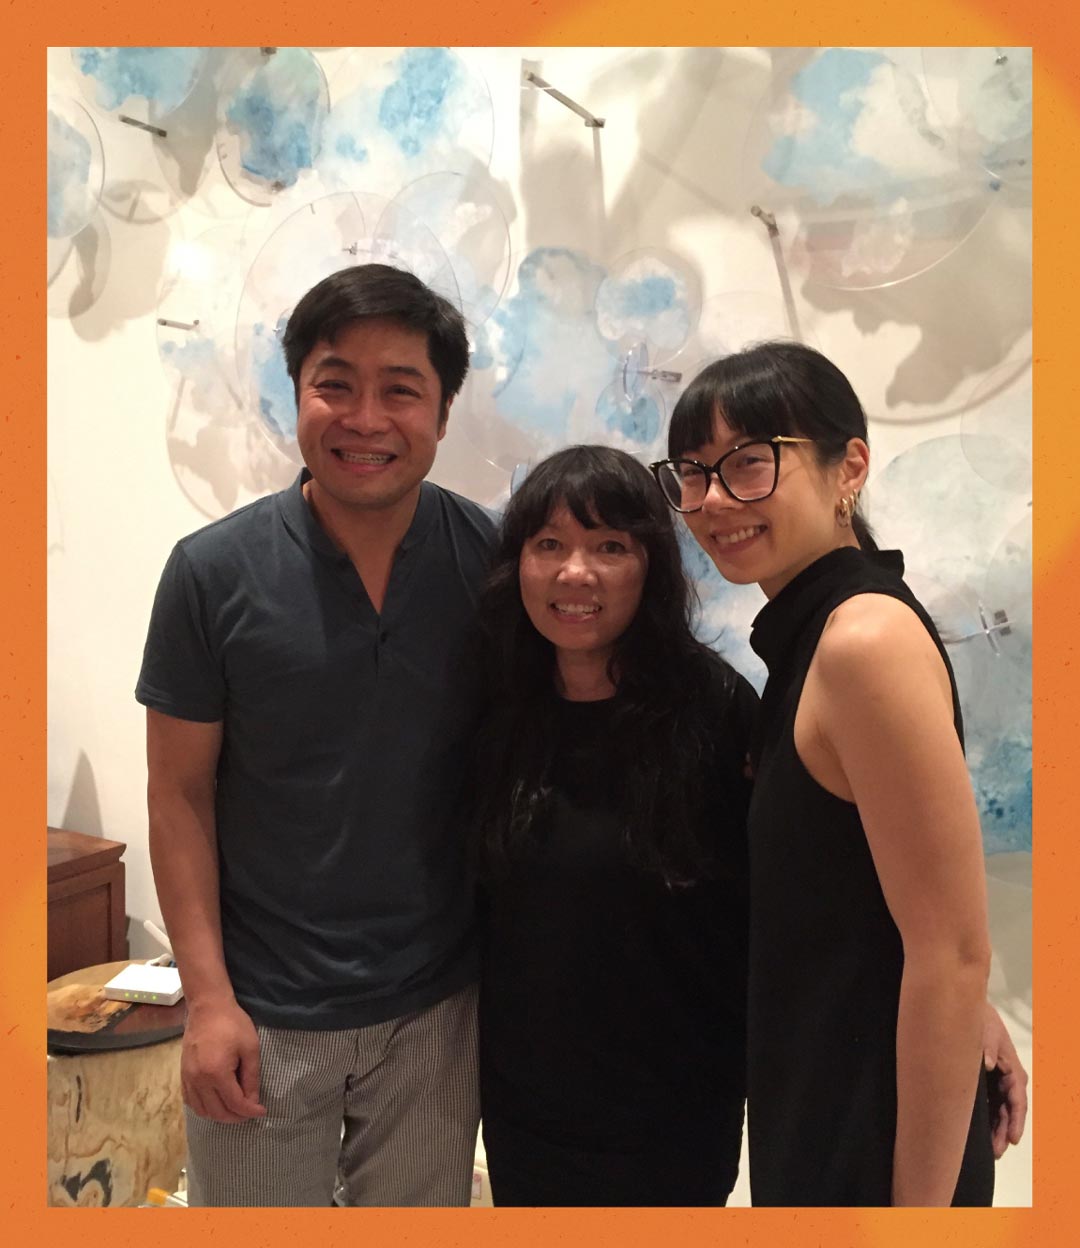 Kenneth and his wife Penny (right) with the artist Suzann (middle).